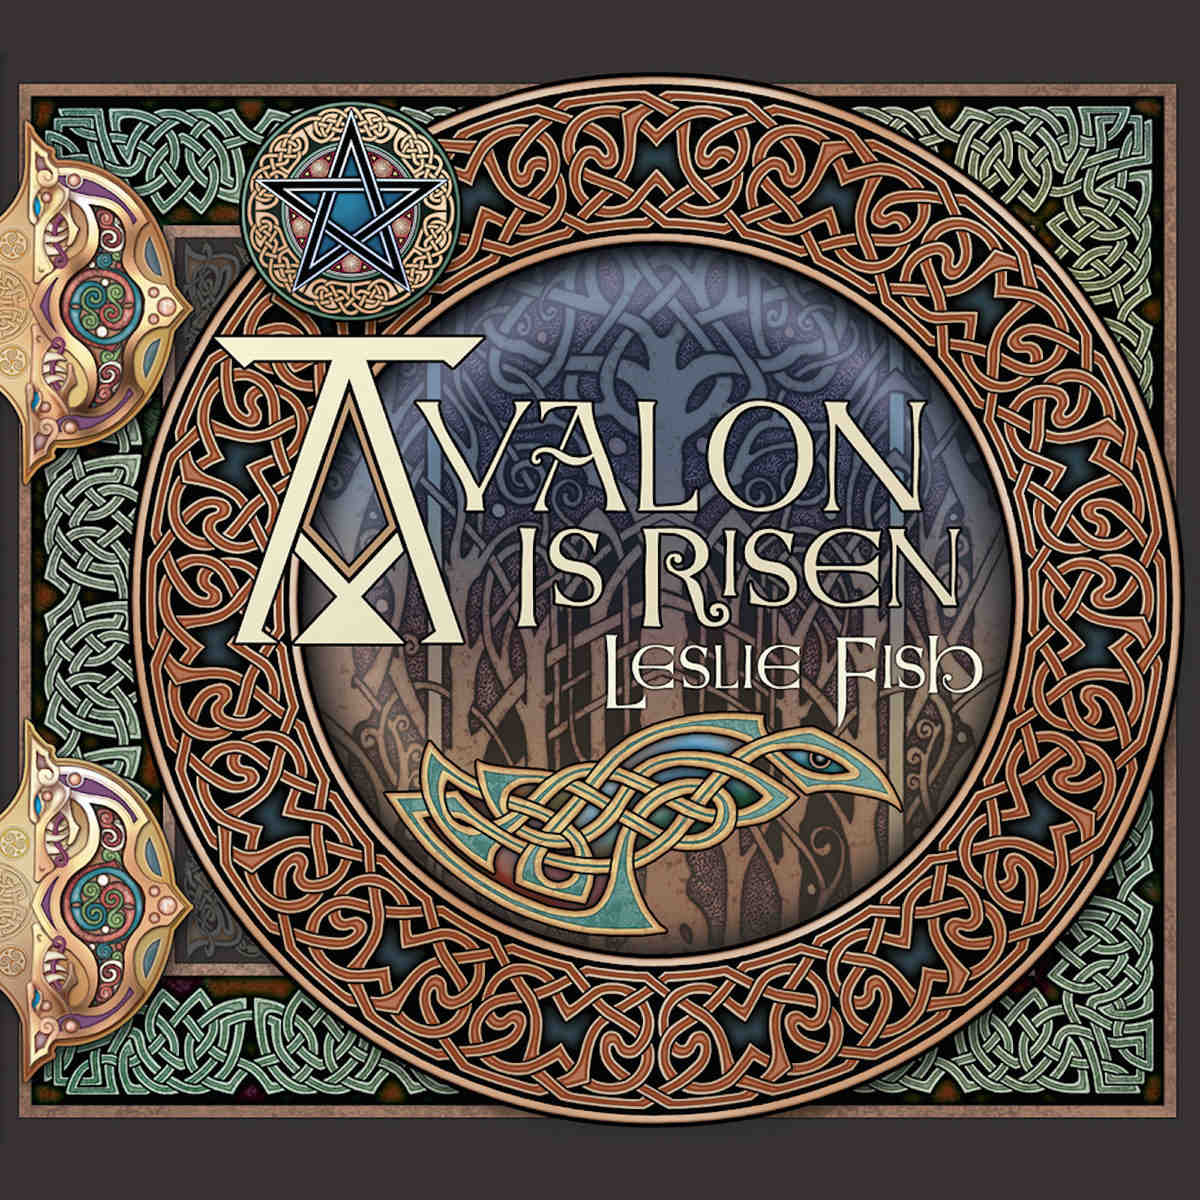 What is Avalon in King Arthur?